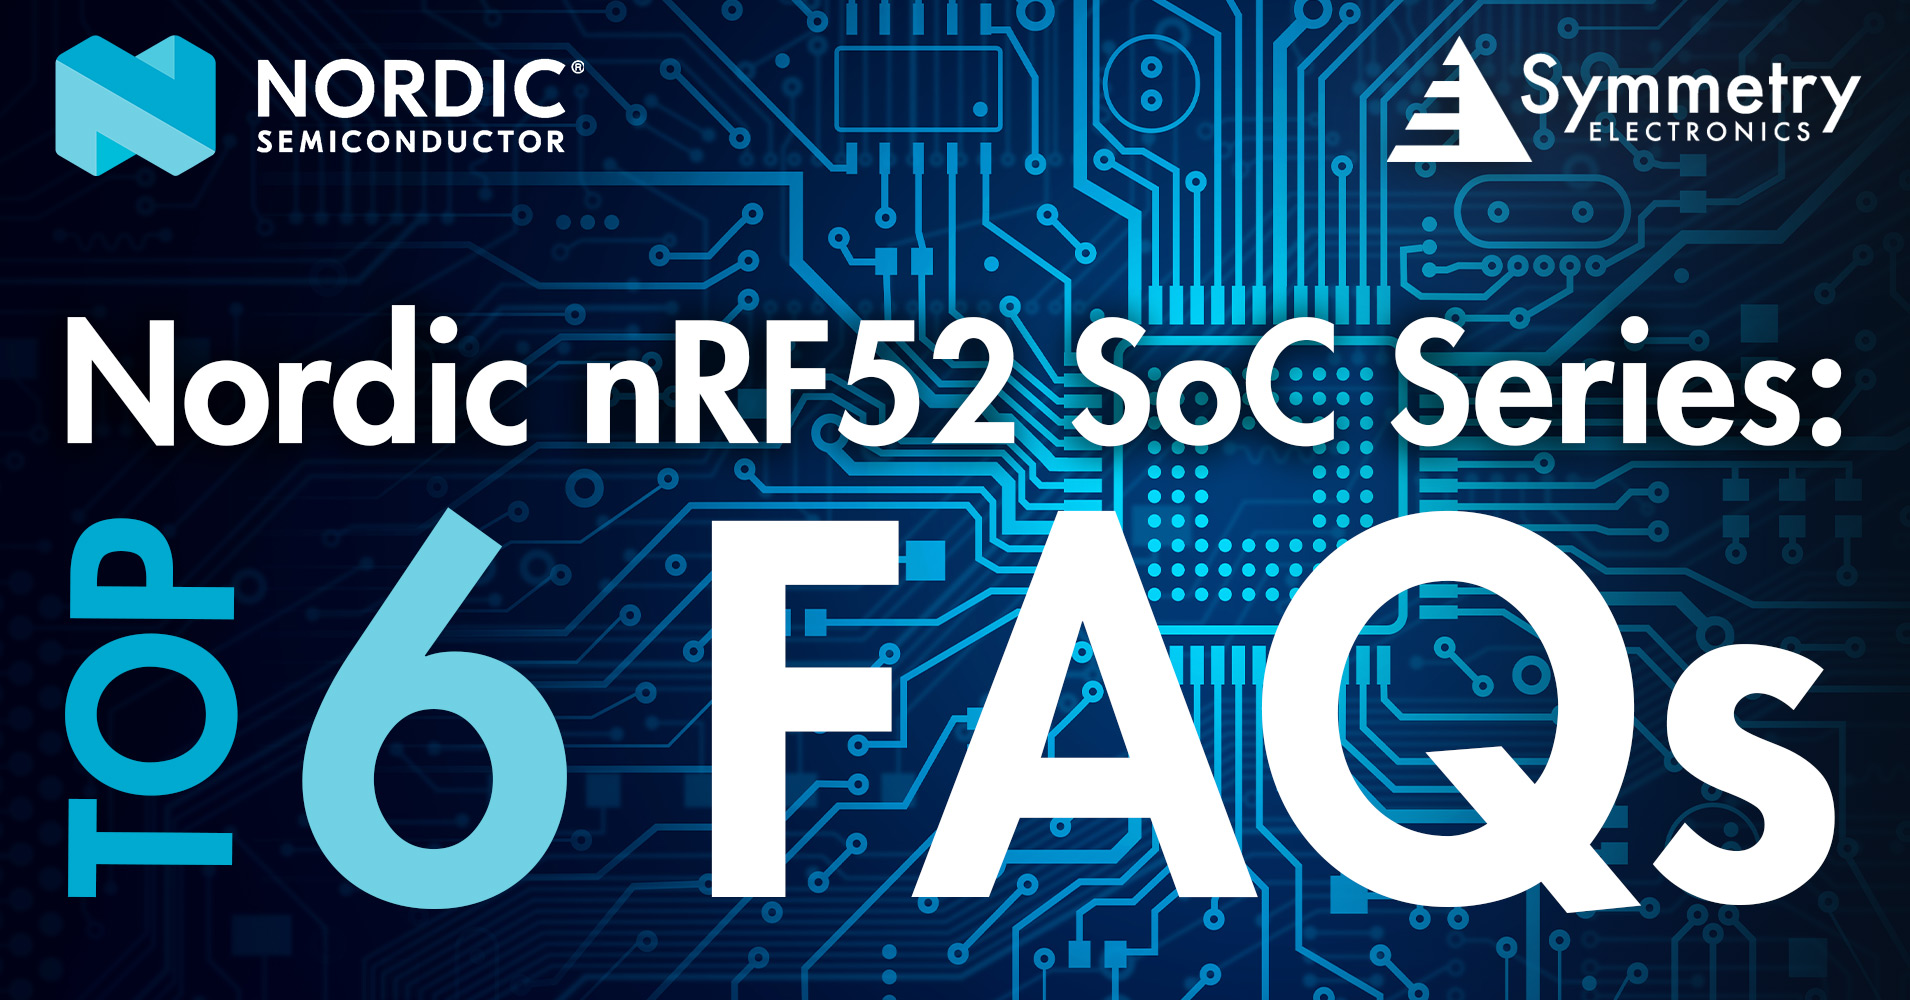 Symmetry-Electronics-Answers-Frequently-Asked-Questions-About-Nordic's-nRF52-SoC-Series